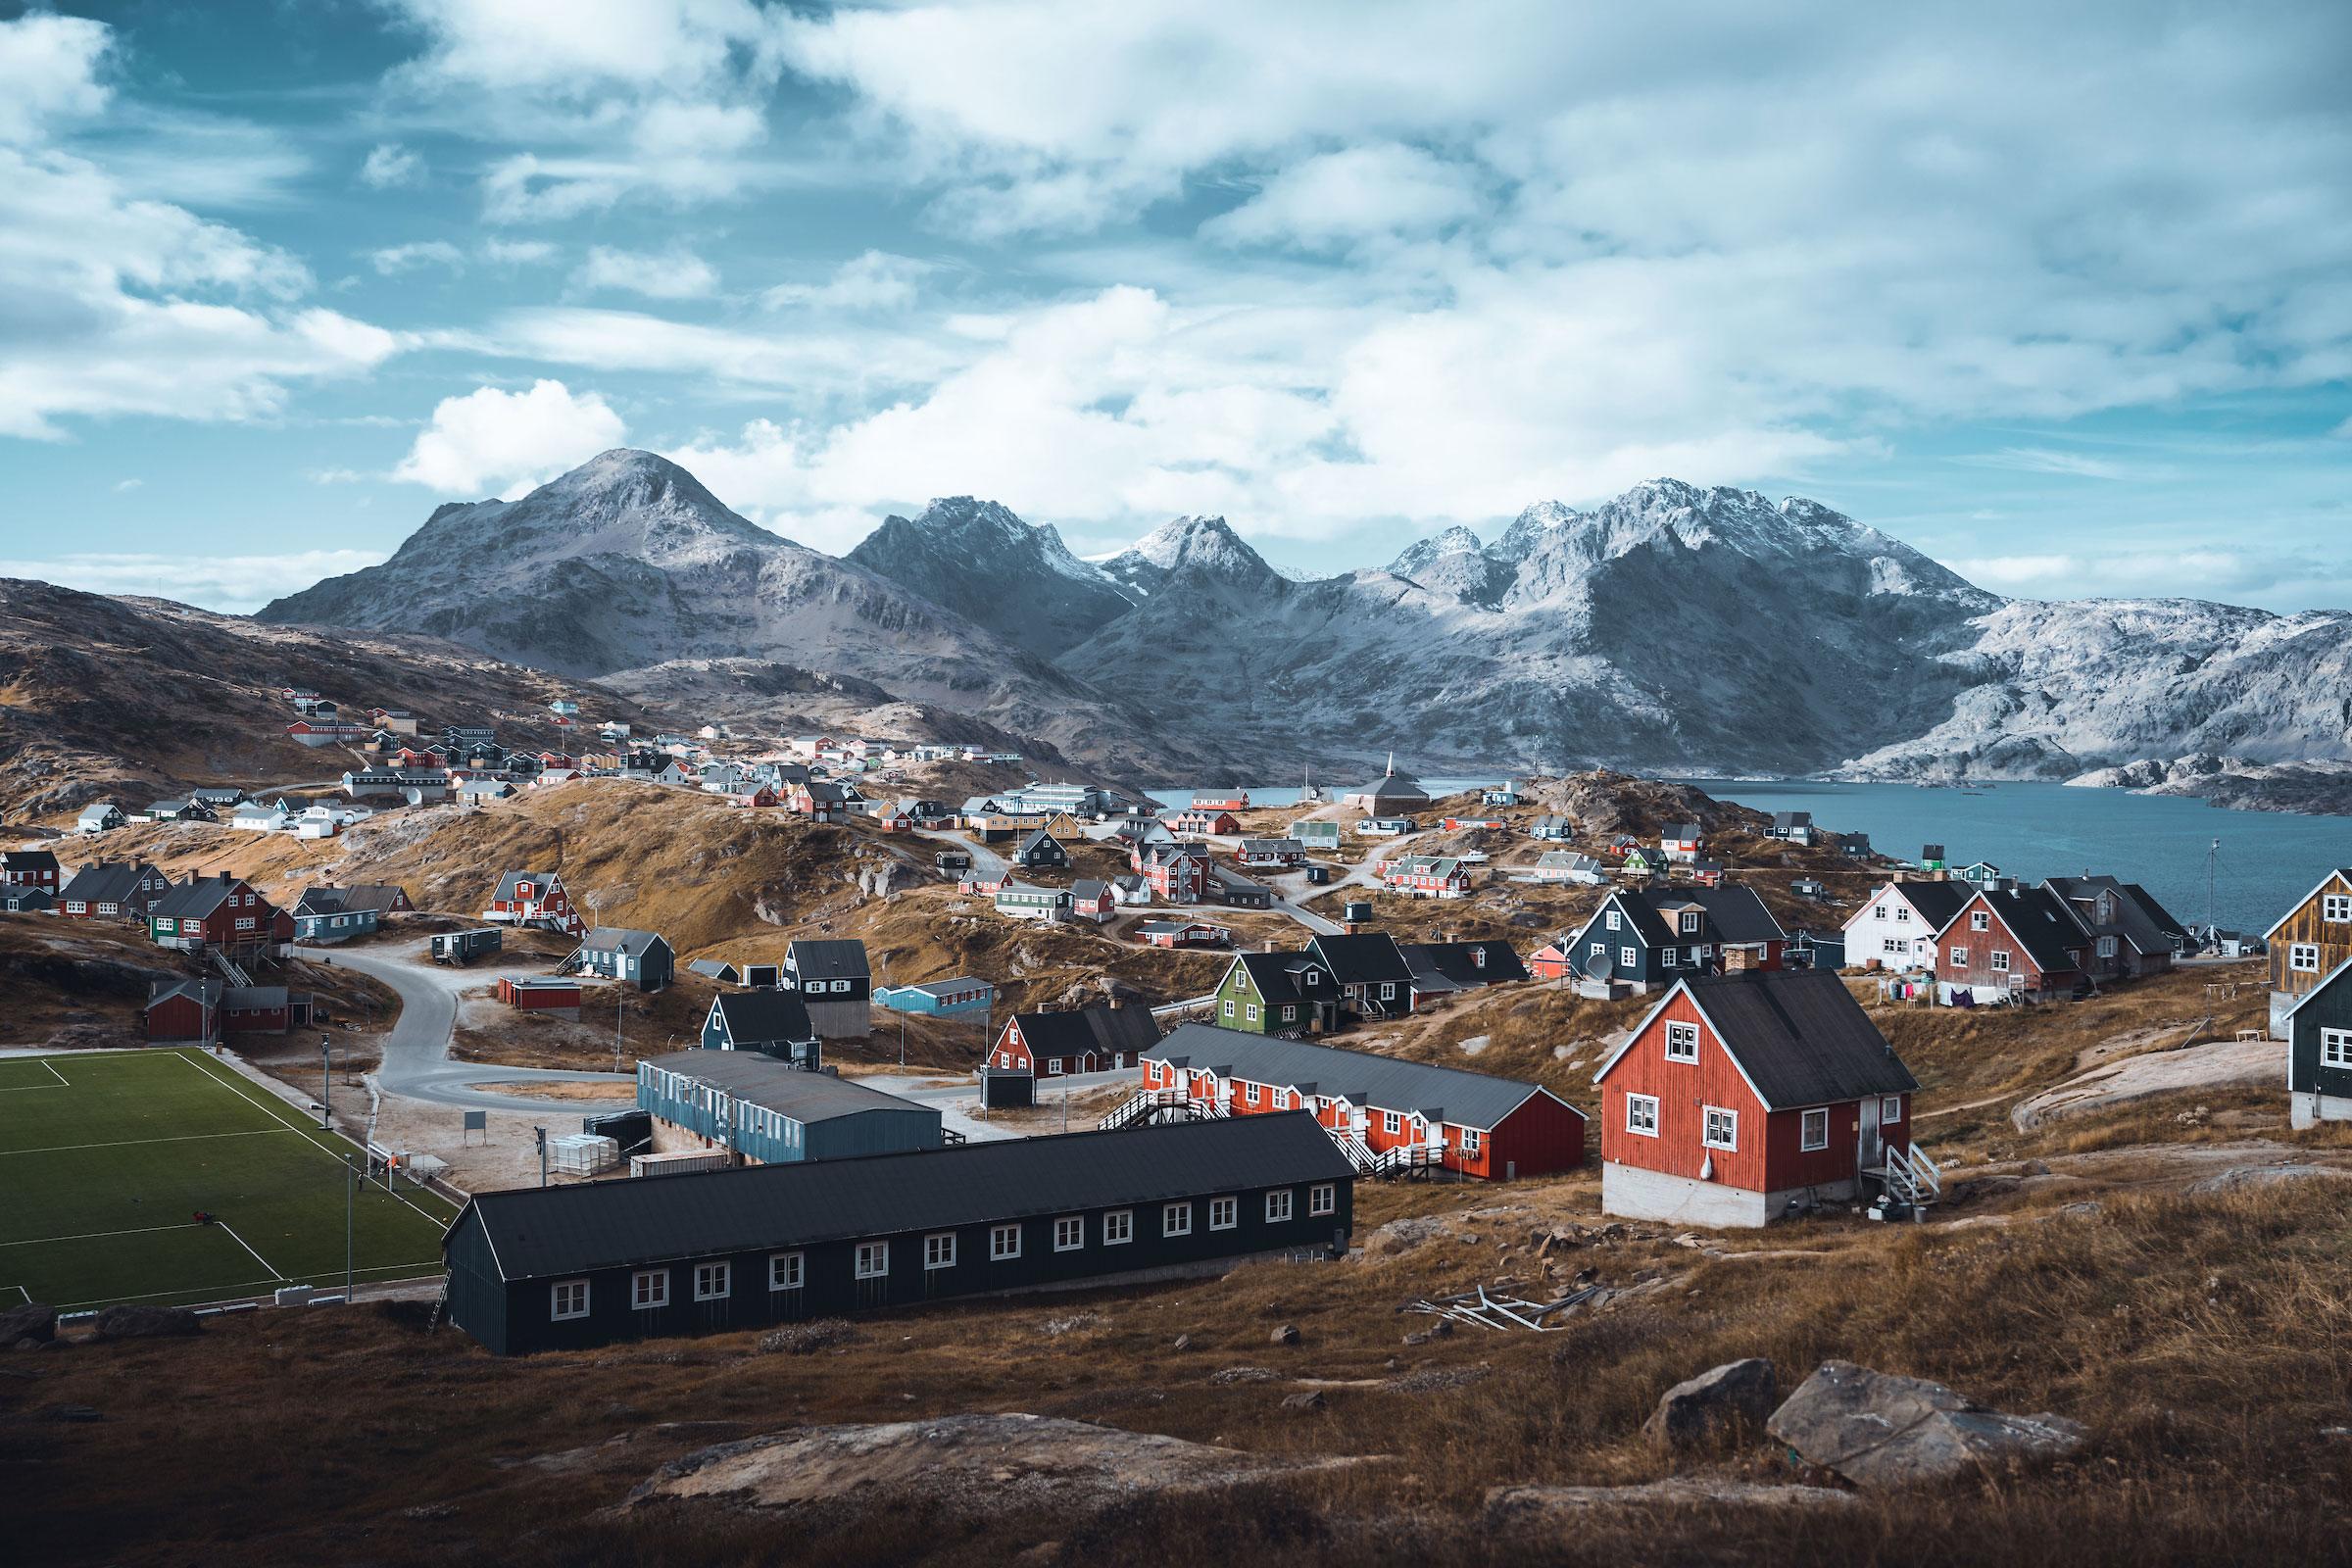 Winter coming closer. Photo by Norris Niman - Visit Greenland